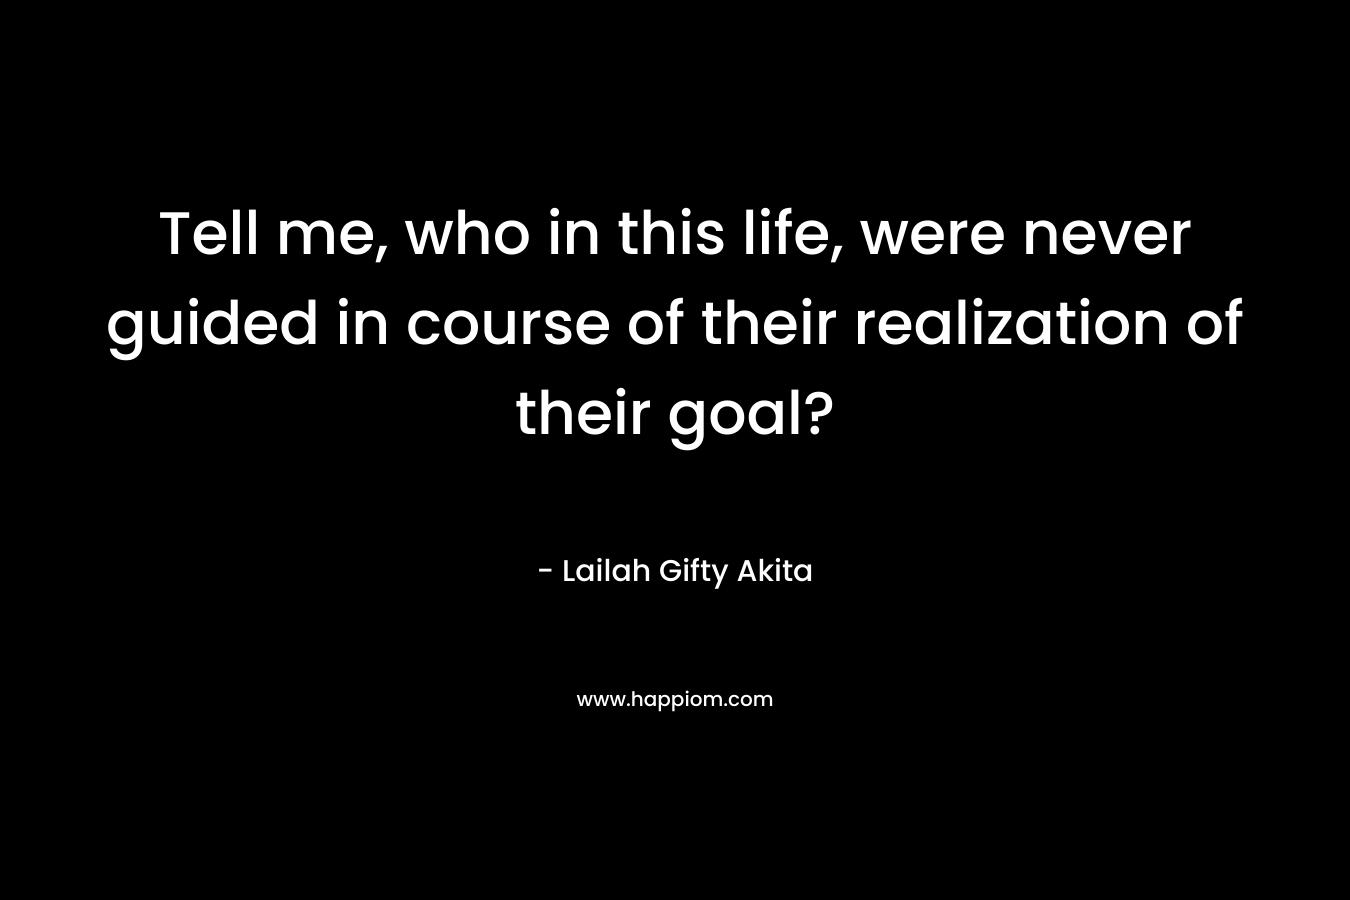 Tell me, who in this life, were never guided in course of their realization of their goal?